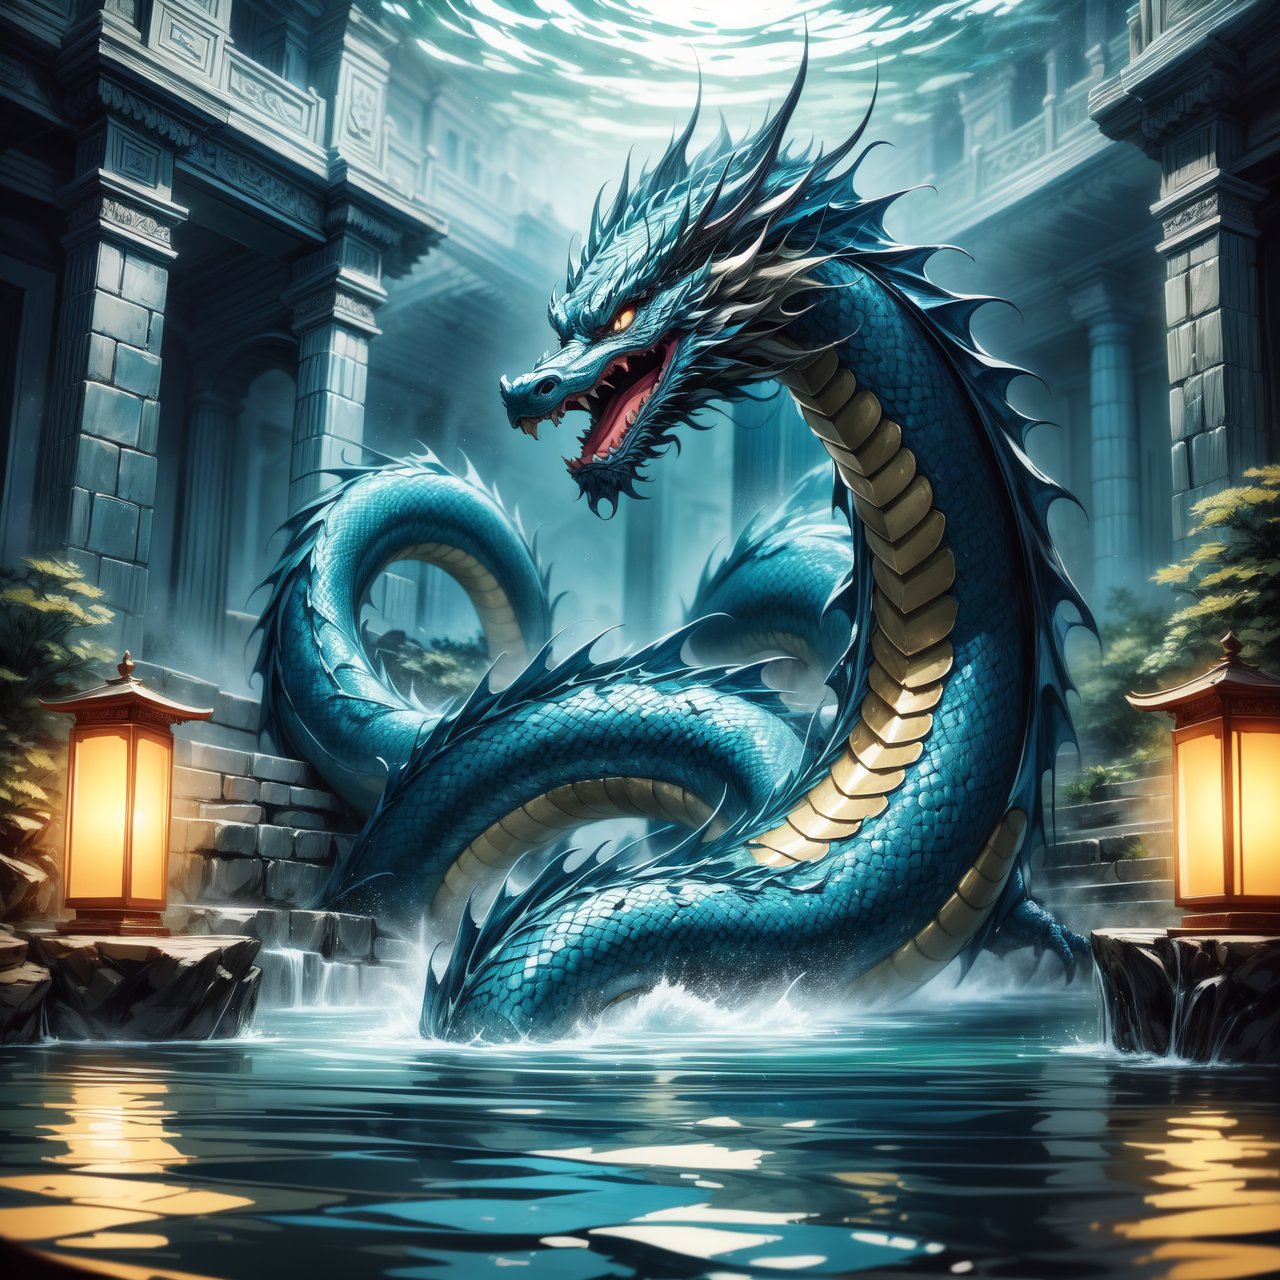 A mystical scene illustrating 'Hidden dragon, do not act' (潜龙勿用), emphasizing the presence of a traditional Chinese dragon. The dragon, with its splendid scales and powerful presence, is subtly depicted as lurking in the depths of a deep and ancient dragon pool, signaling a state of readiness yet restraint. The dragon's form is partially concealed by the dark, enigmatic waters, hinting at its immense potential and controlled power. The setting evokes a sense of mystery and anticipation, with the dragon's silhouette barely visible, representing the wisdom of hidden strength and the strategic patience of potential unleashed at the right moment.
By FuturEvoLab, (Masterpiece, Best Quality, 8k:1.2), (Ultra-Detailed, Highres, Extremely Detailed, Absurdres, Incredibly Absurdres, Huge Filesize:1.1), 